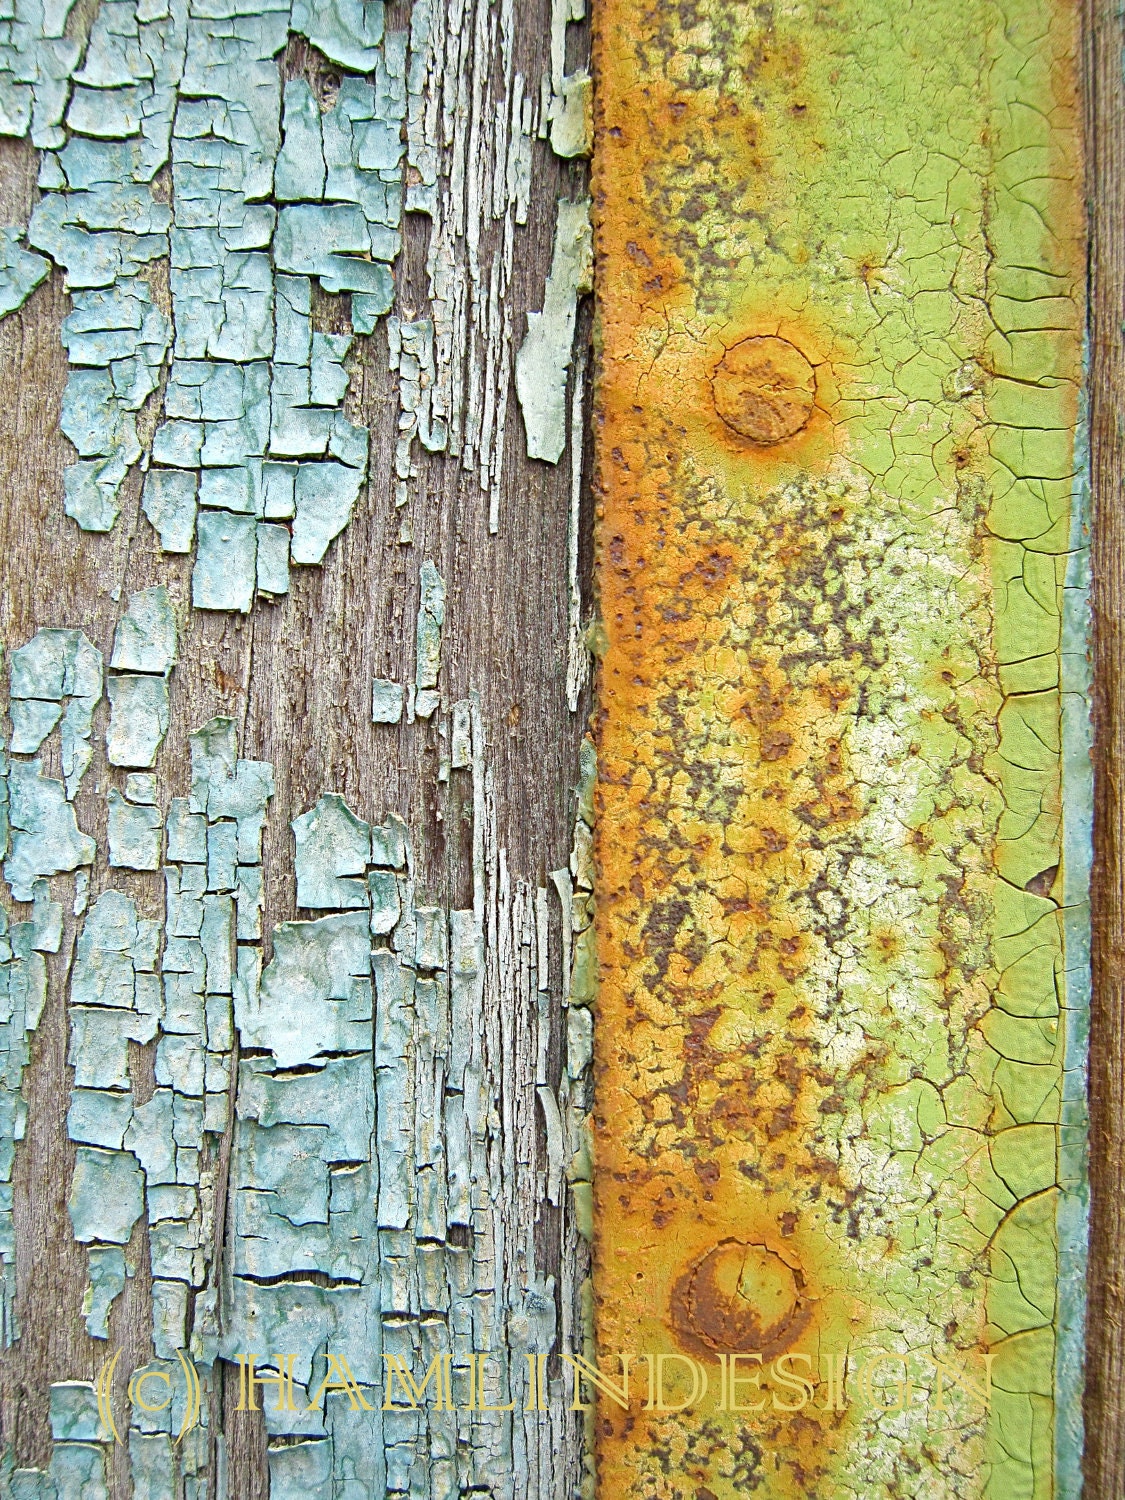 Texture Old Wood Door pastel colored cracked paint 13cm x 18cm (5in x 7in) unframed